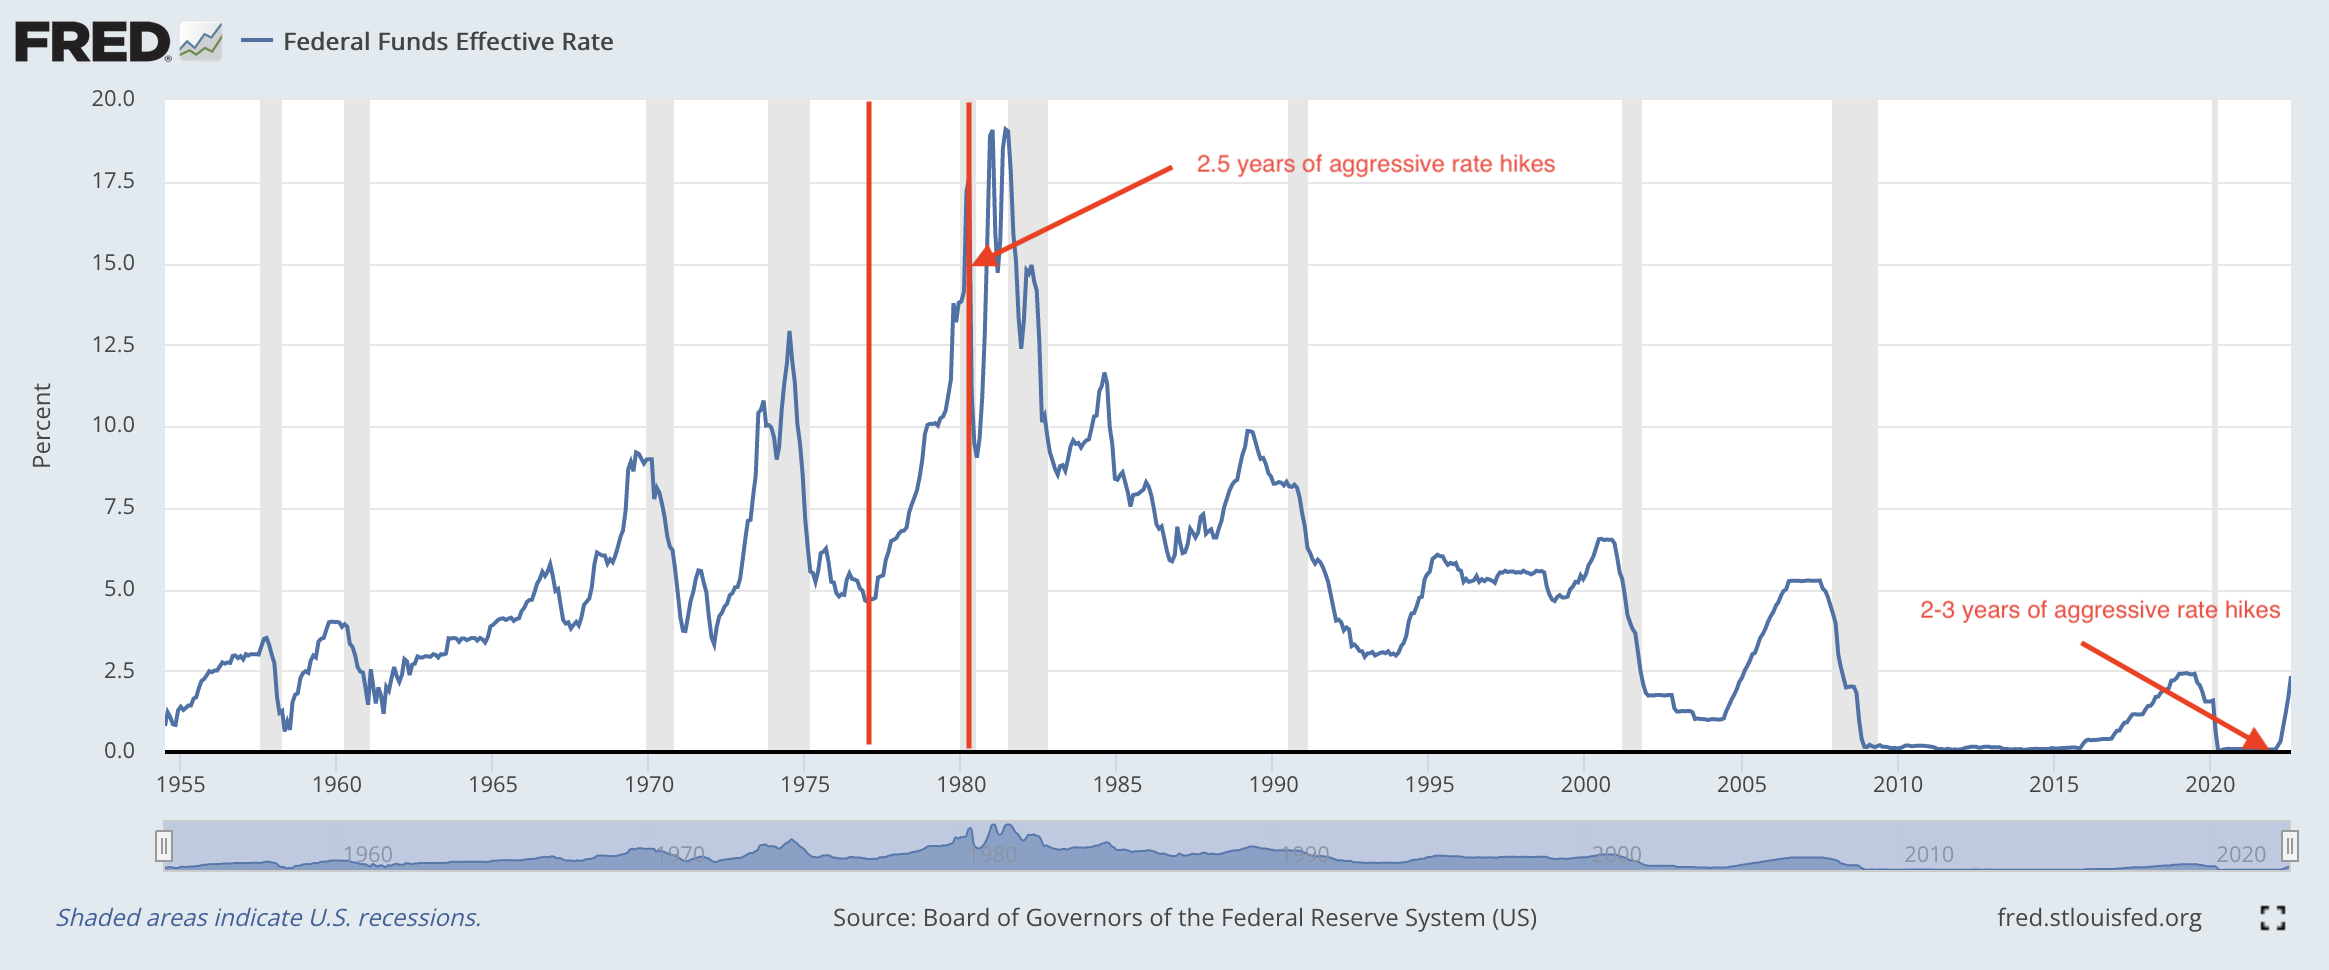 Fred Chart of Federal Funds Effective Rate and rate increases in sept 2022